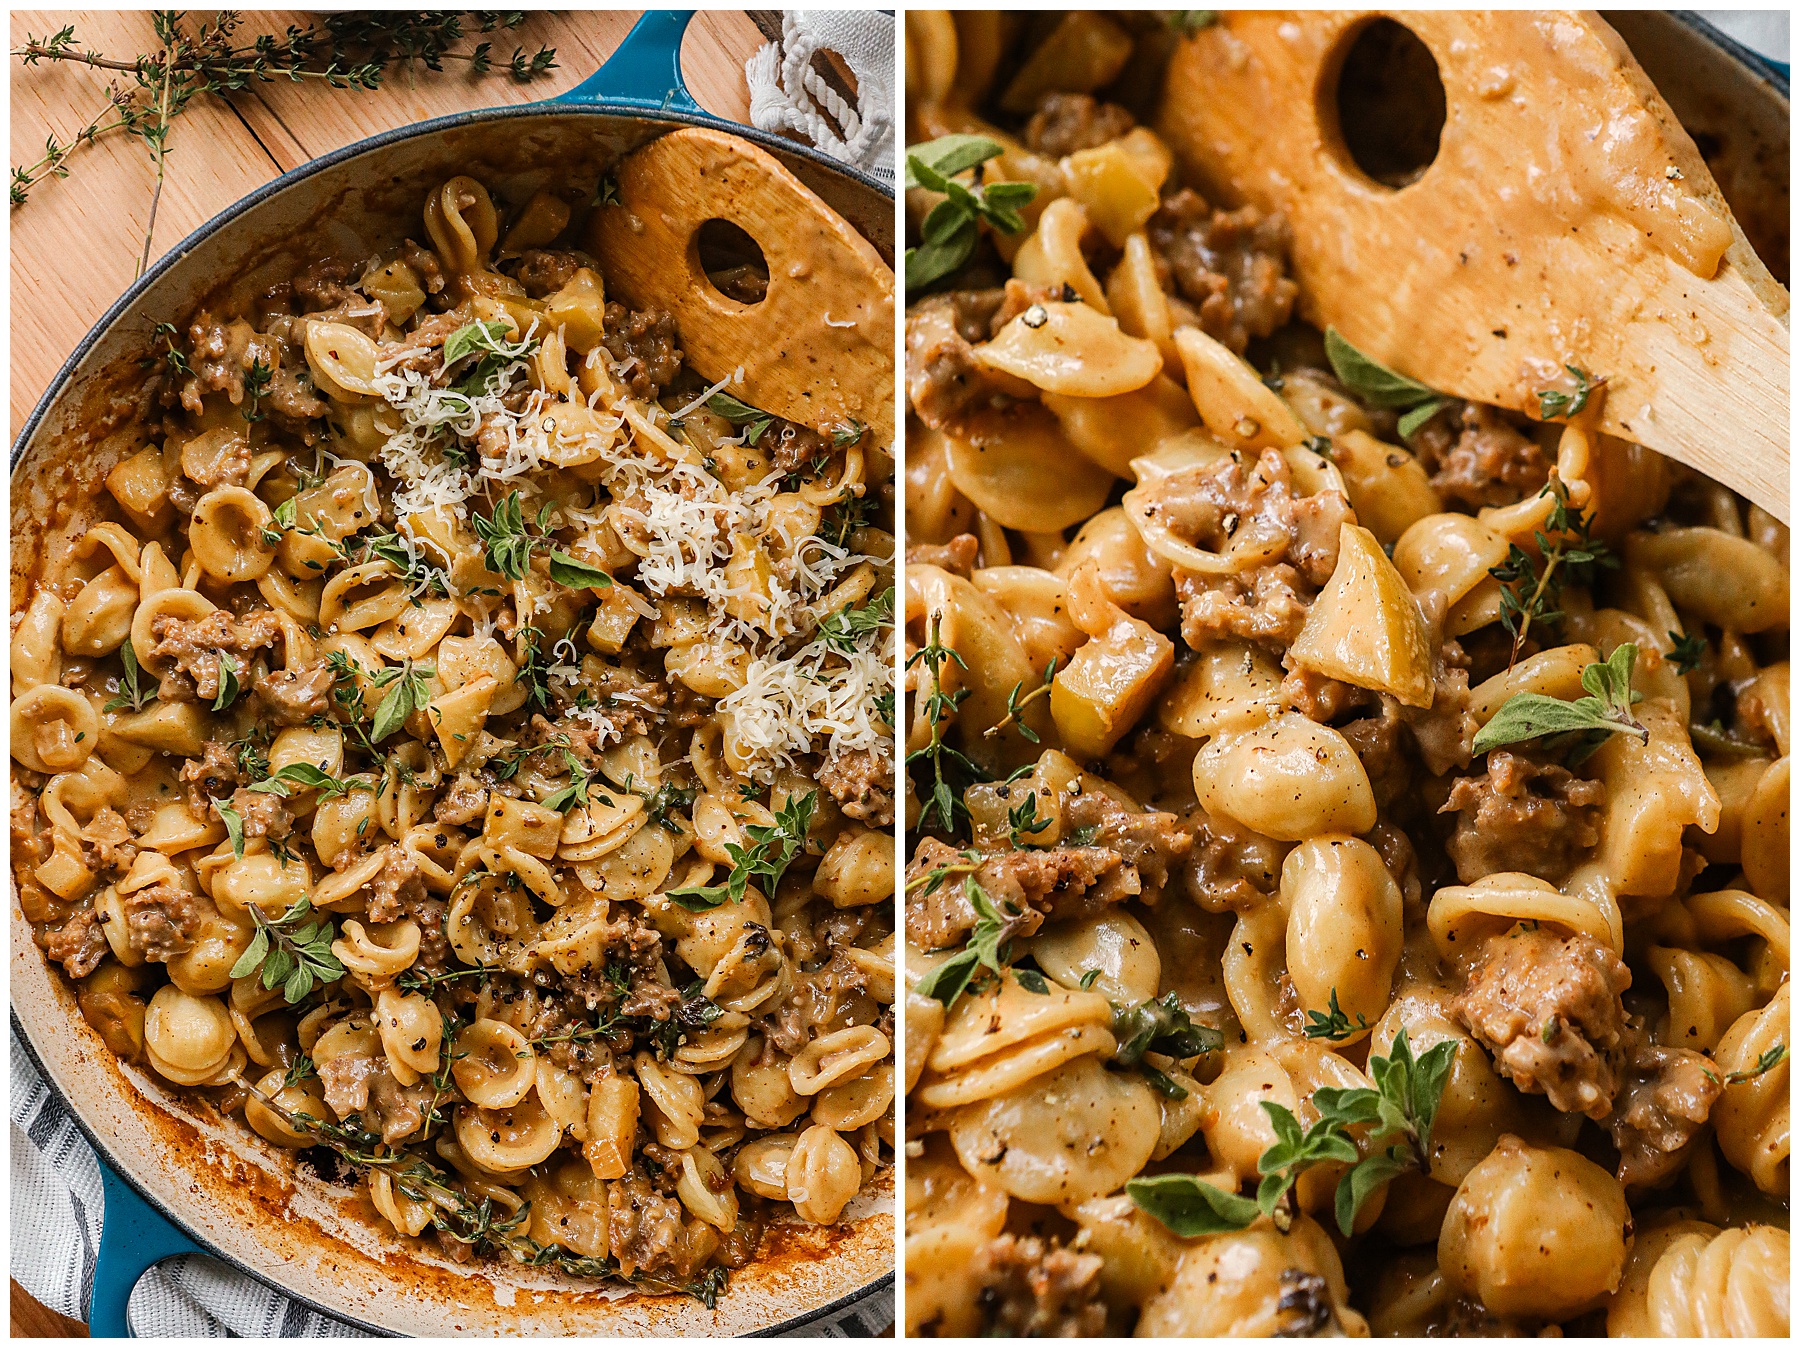 Cozy pasta recipe with apples and sausage